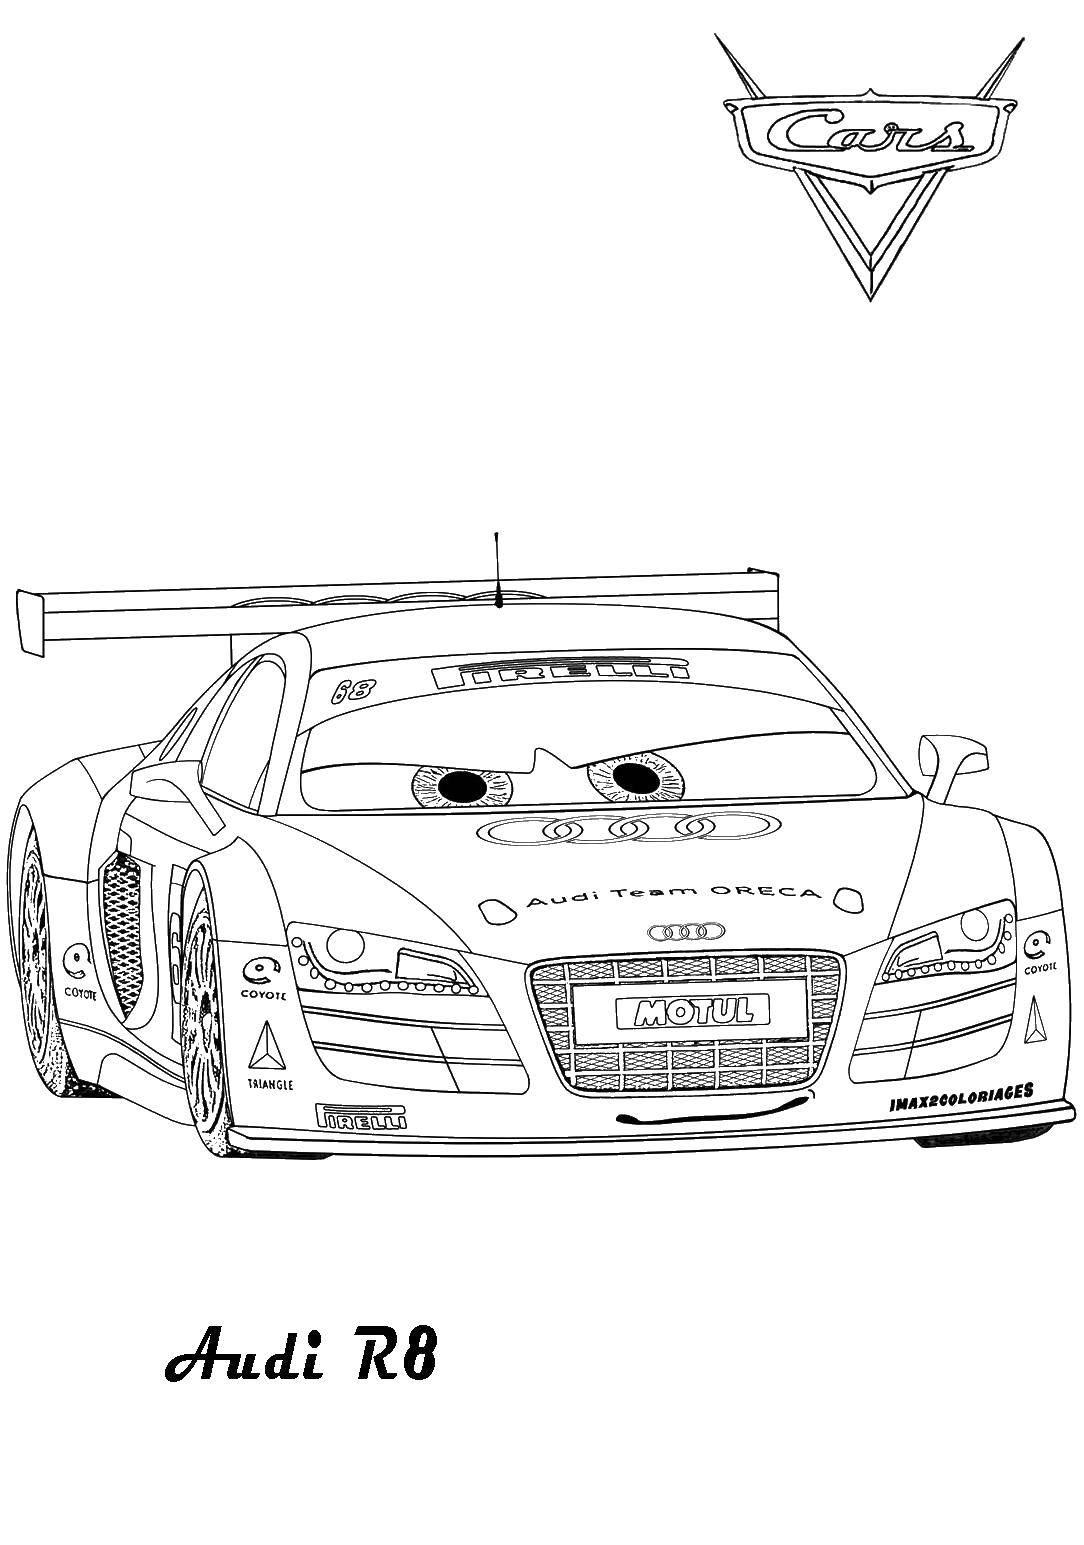 Coloring Race car. Category machine . Tags:  machine.